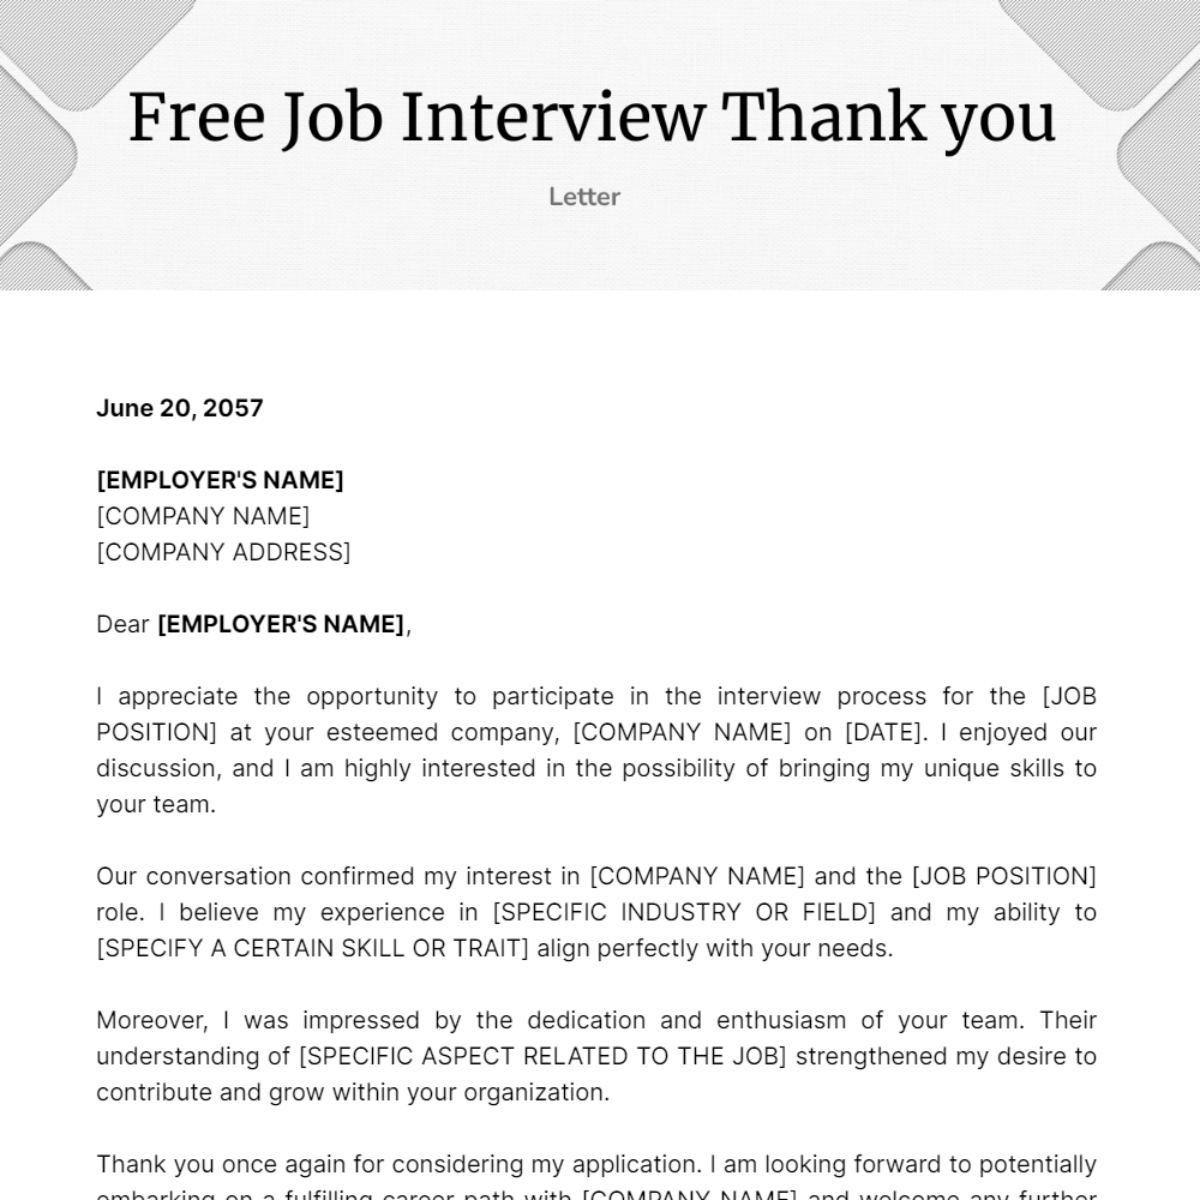 Job Interview Thank you Letter Template